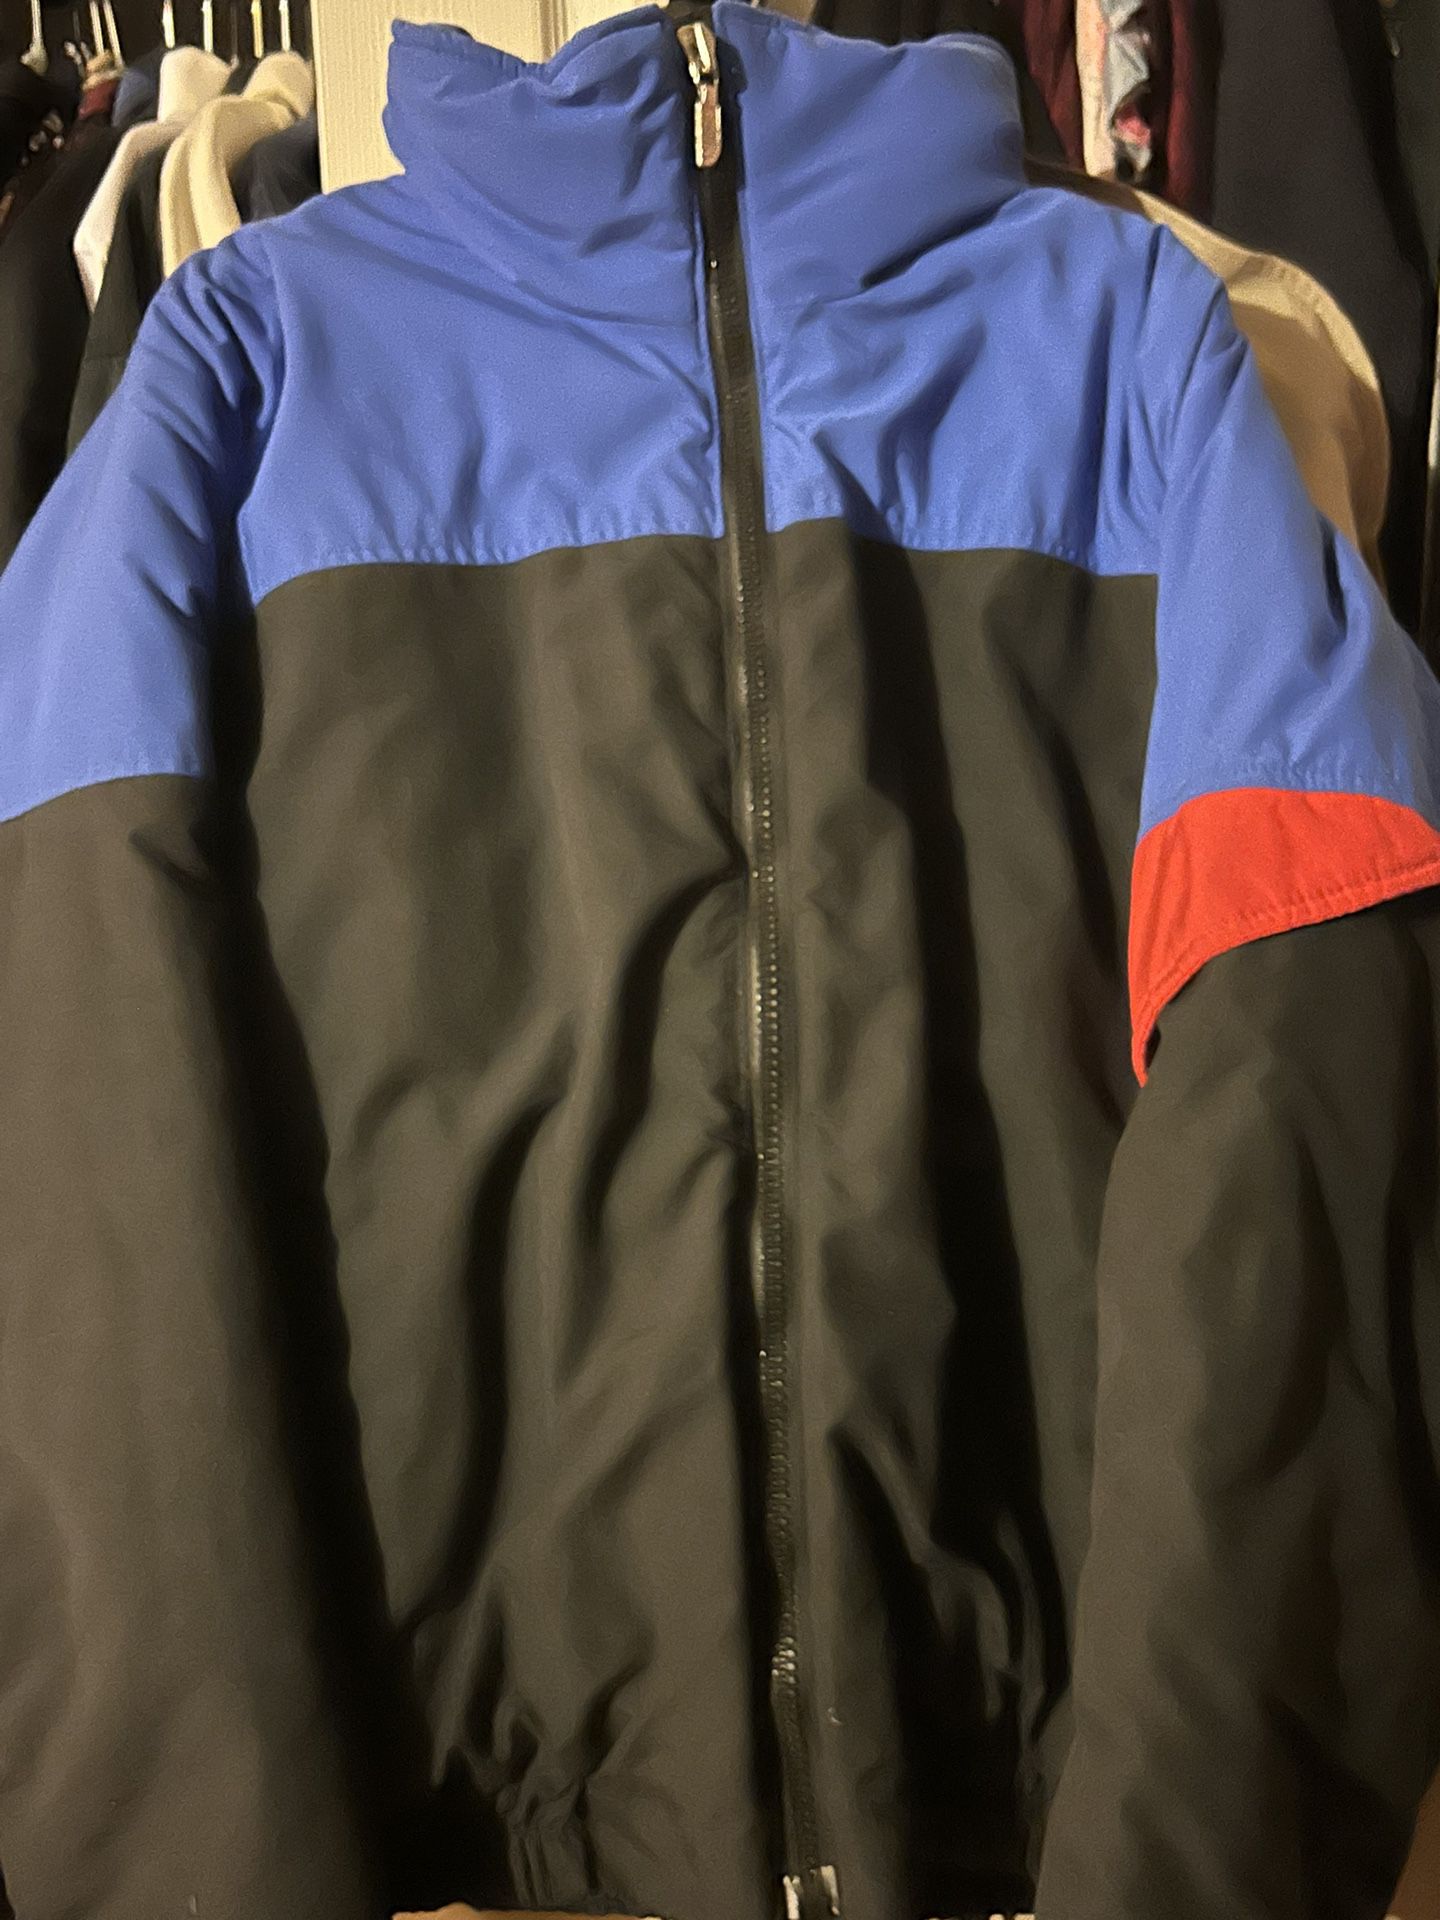 Vintage The North Face jacket